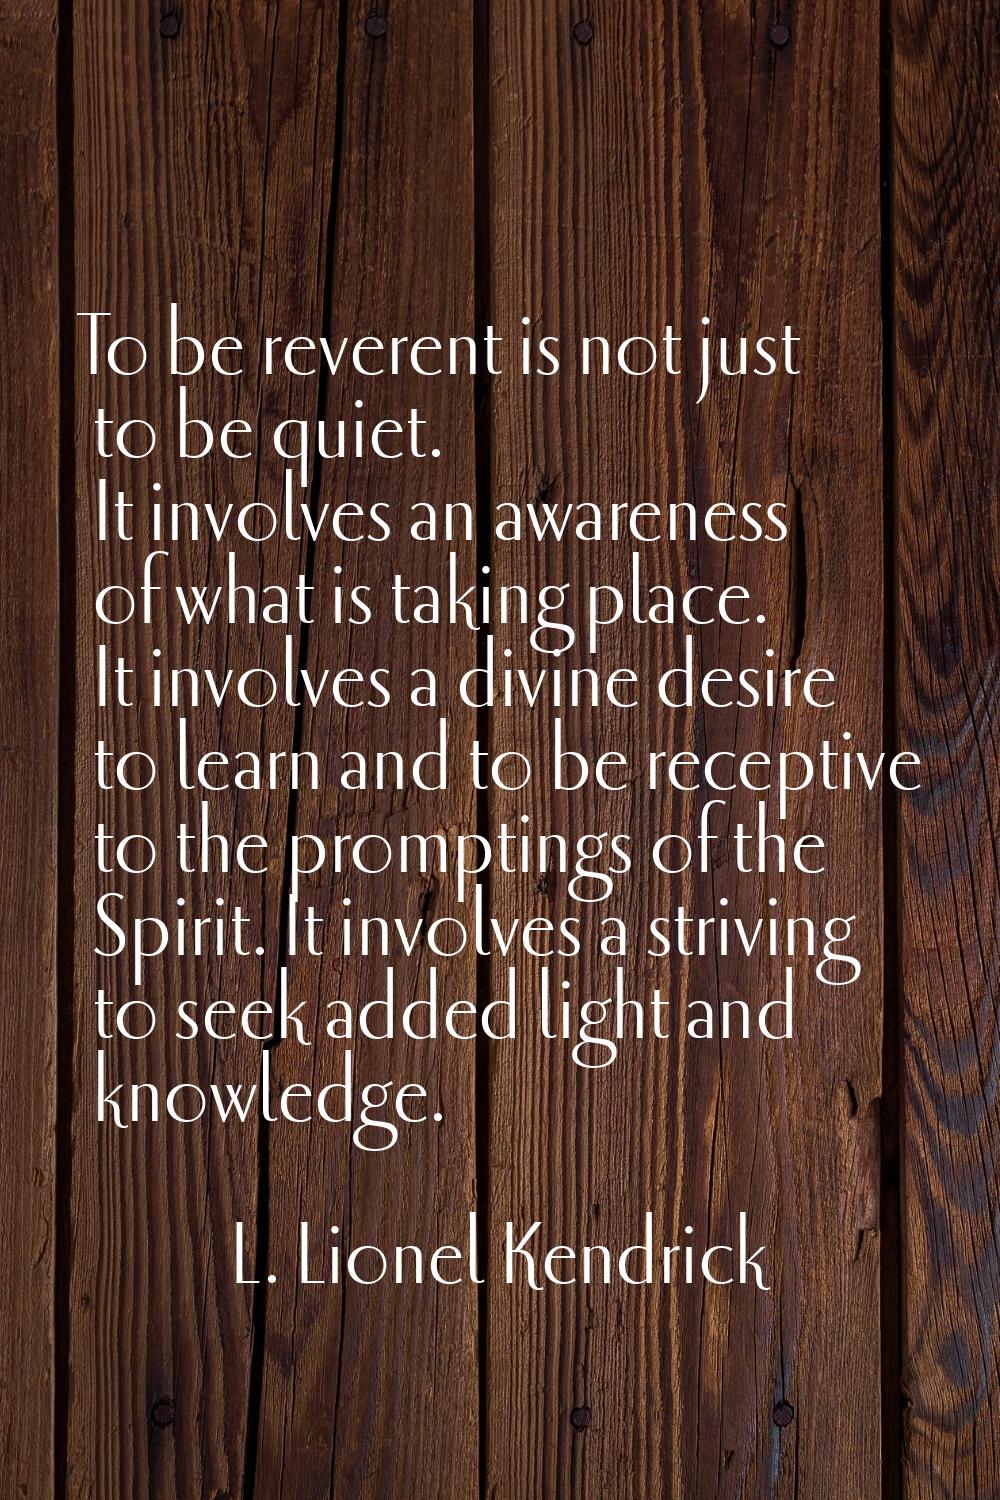 To be reverent is not just to be quiet. It involves an awareness of what is taking place. It involv